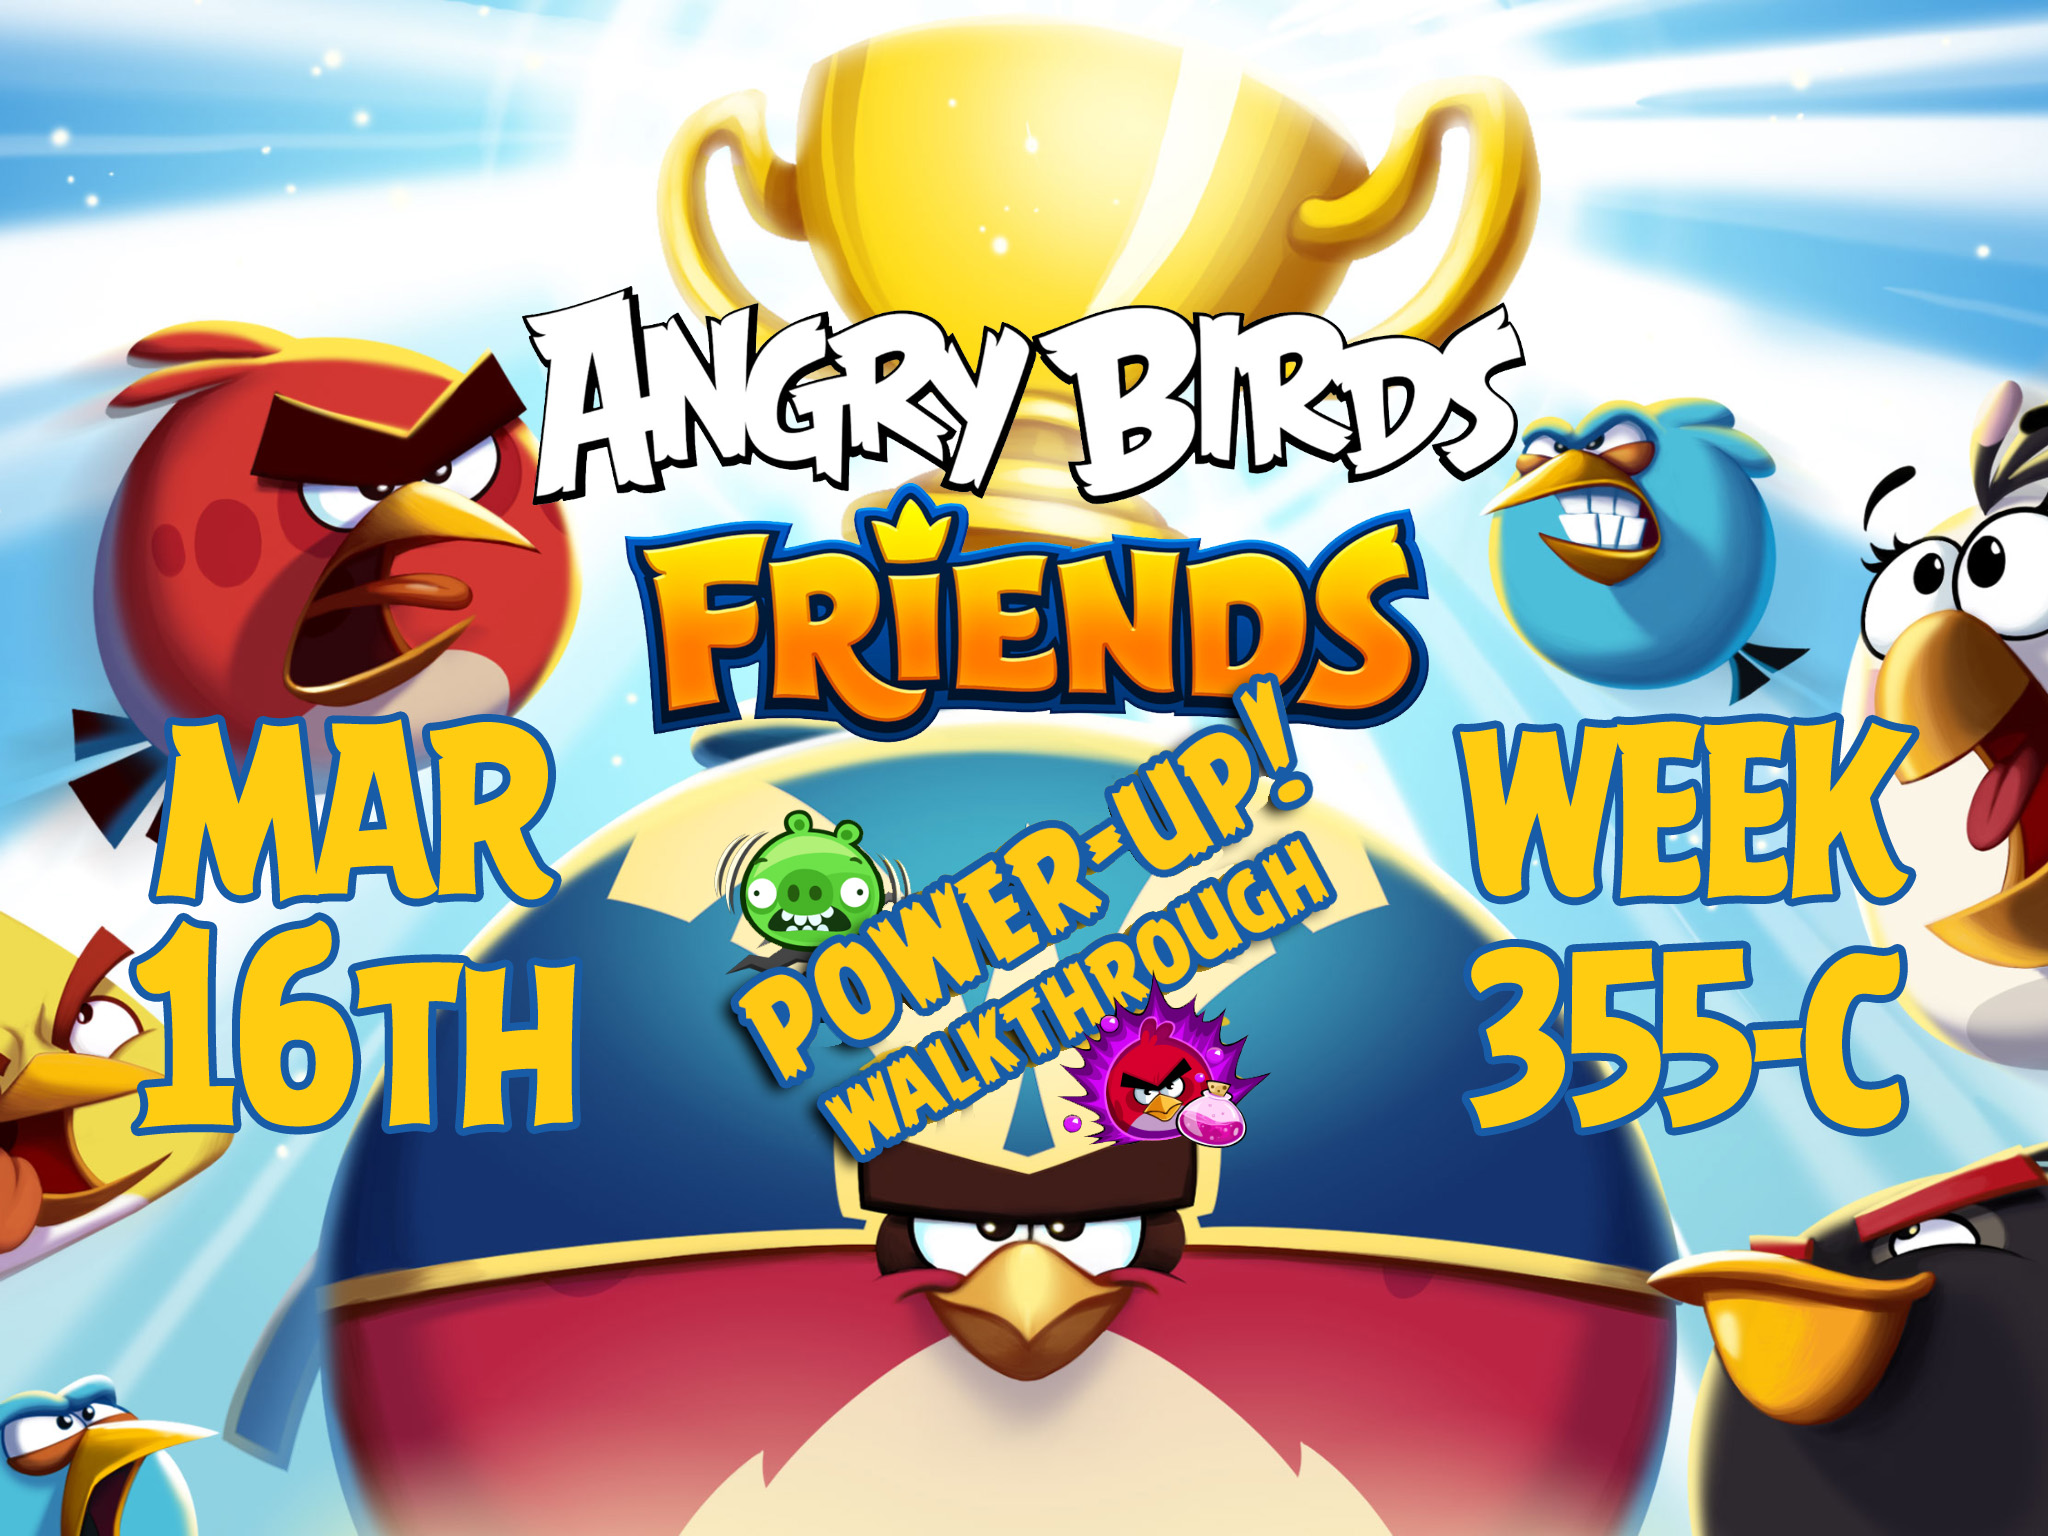 Angry-Birds-Friends-Tournament-Week-355-C-Feature-Image-PU